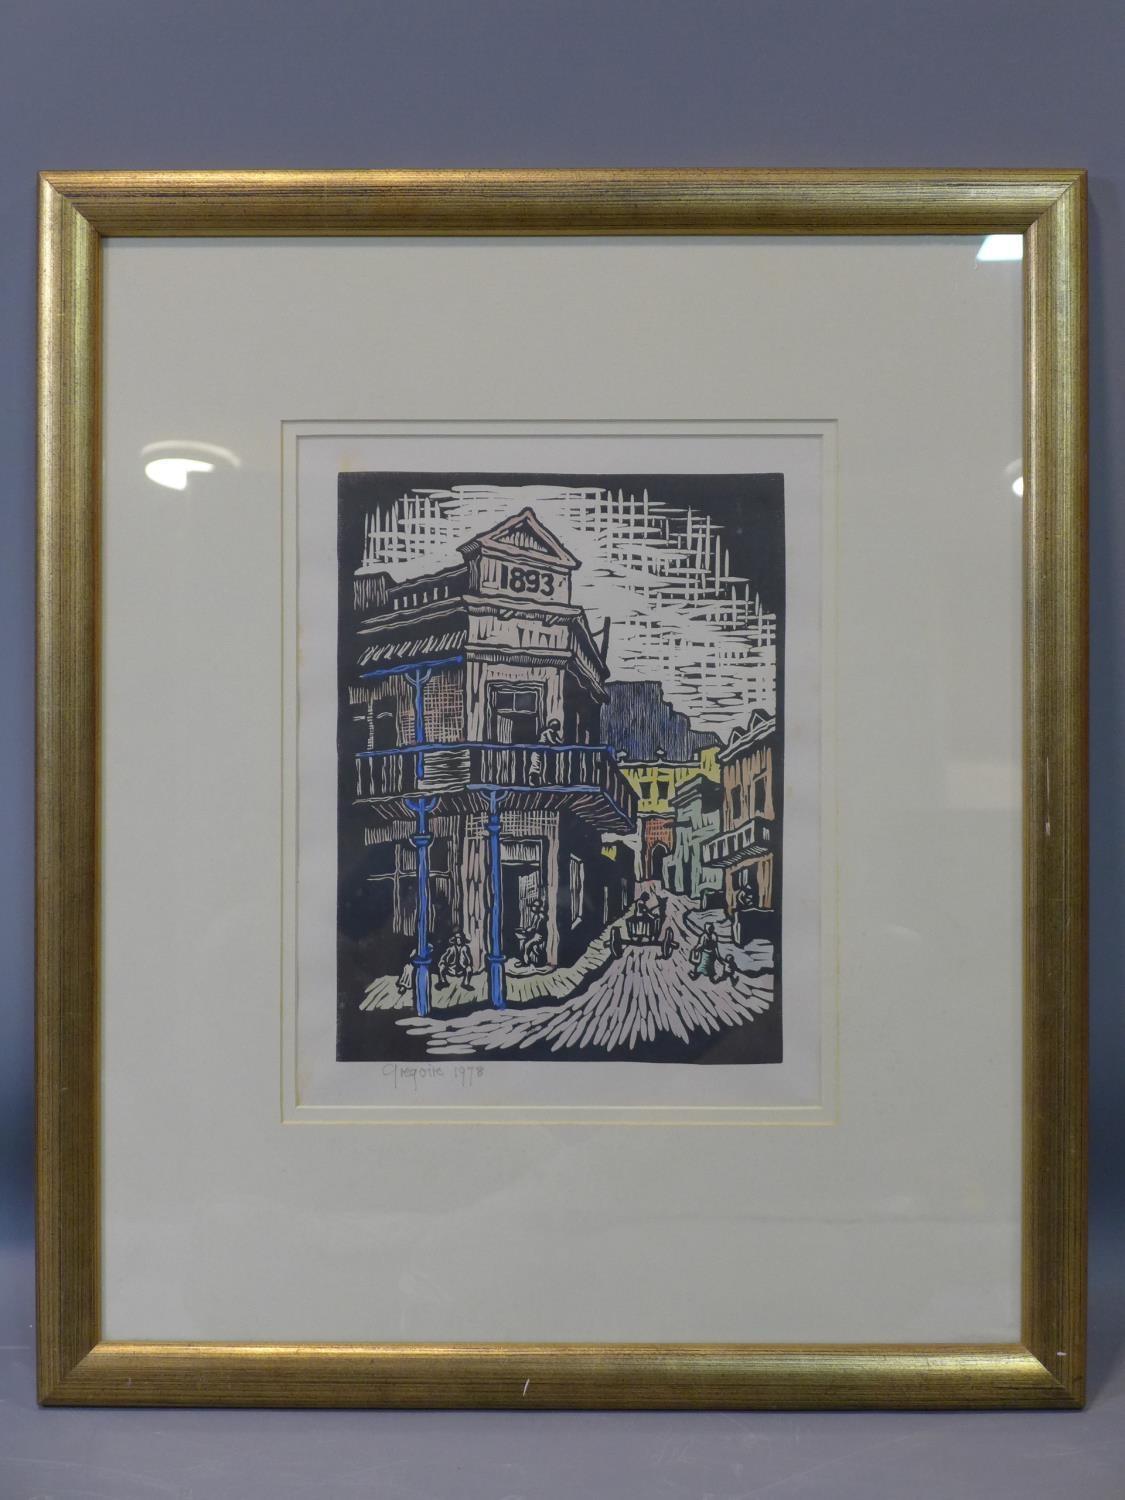 Gregoire Boonzaier (South African, 1909-2005), Street scene, hand-coloured woodcut print, signed and - Image 2 of 4